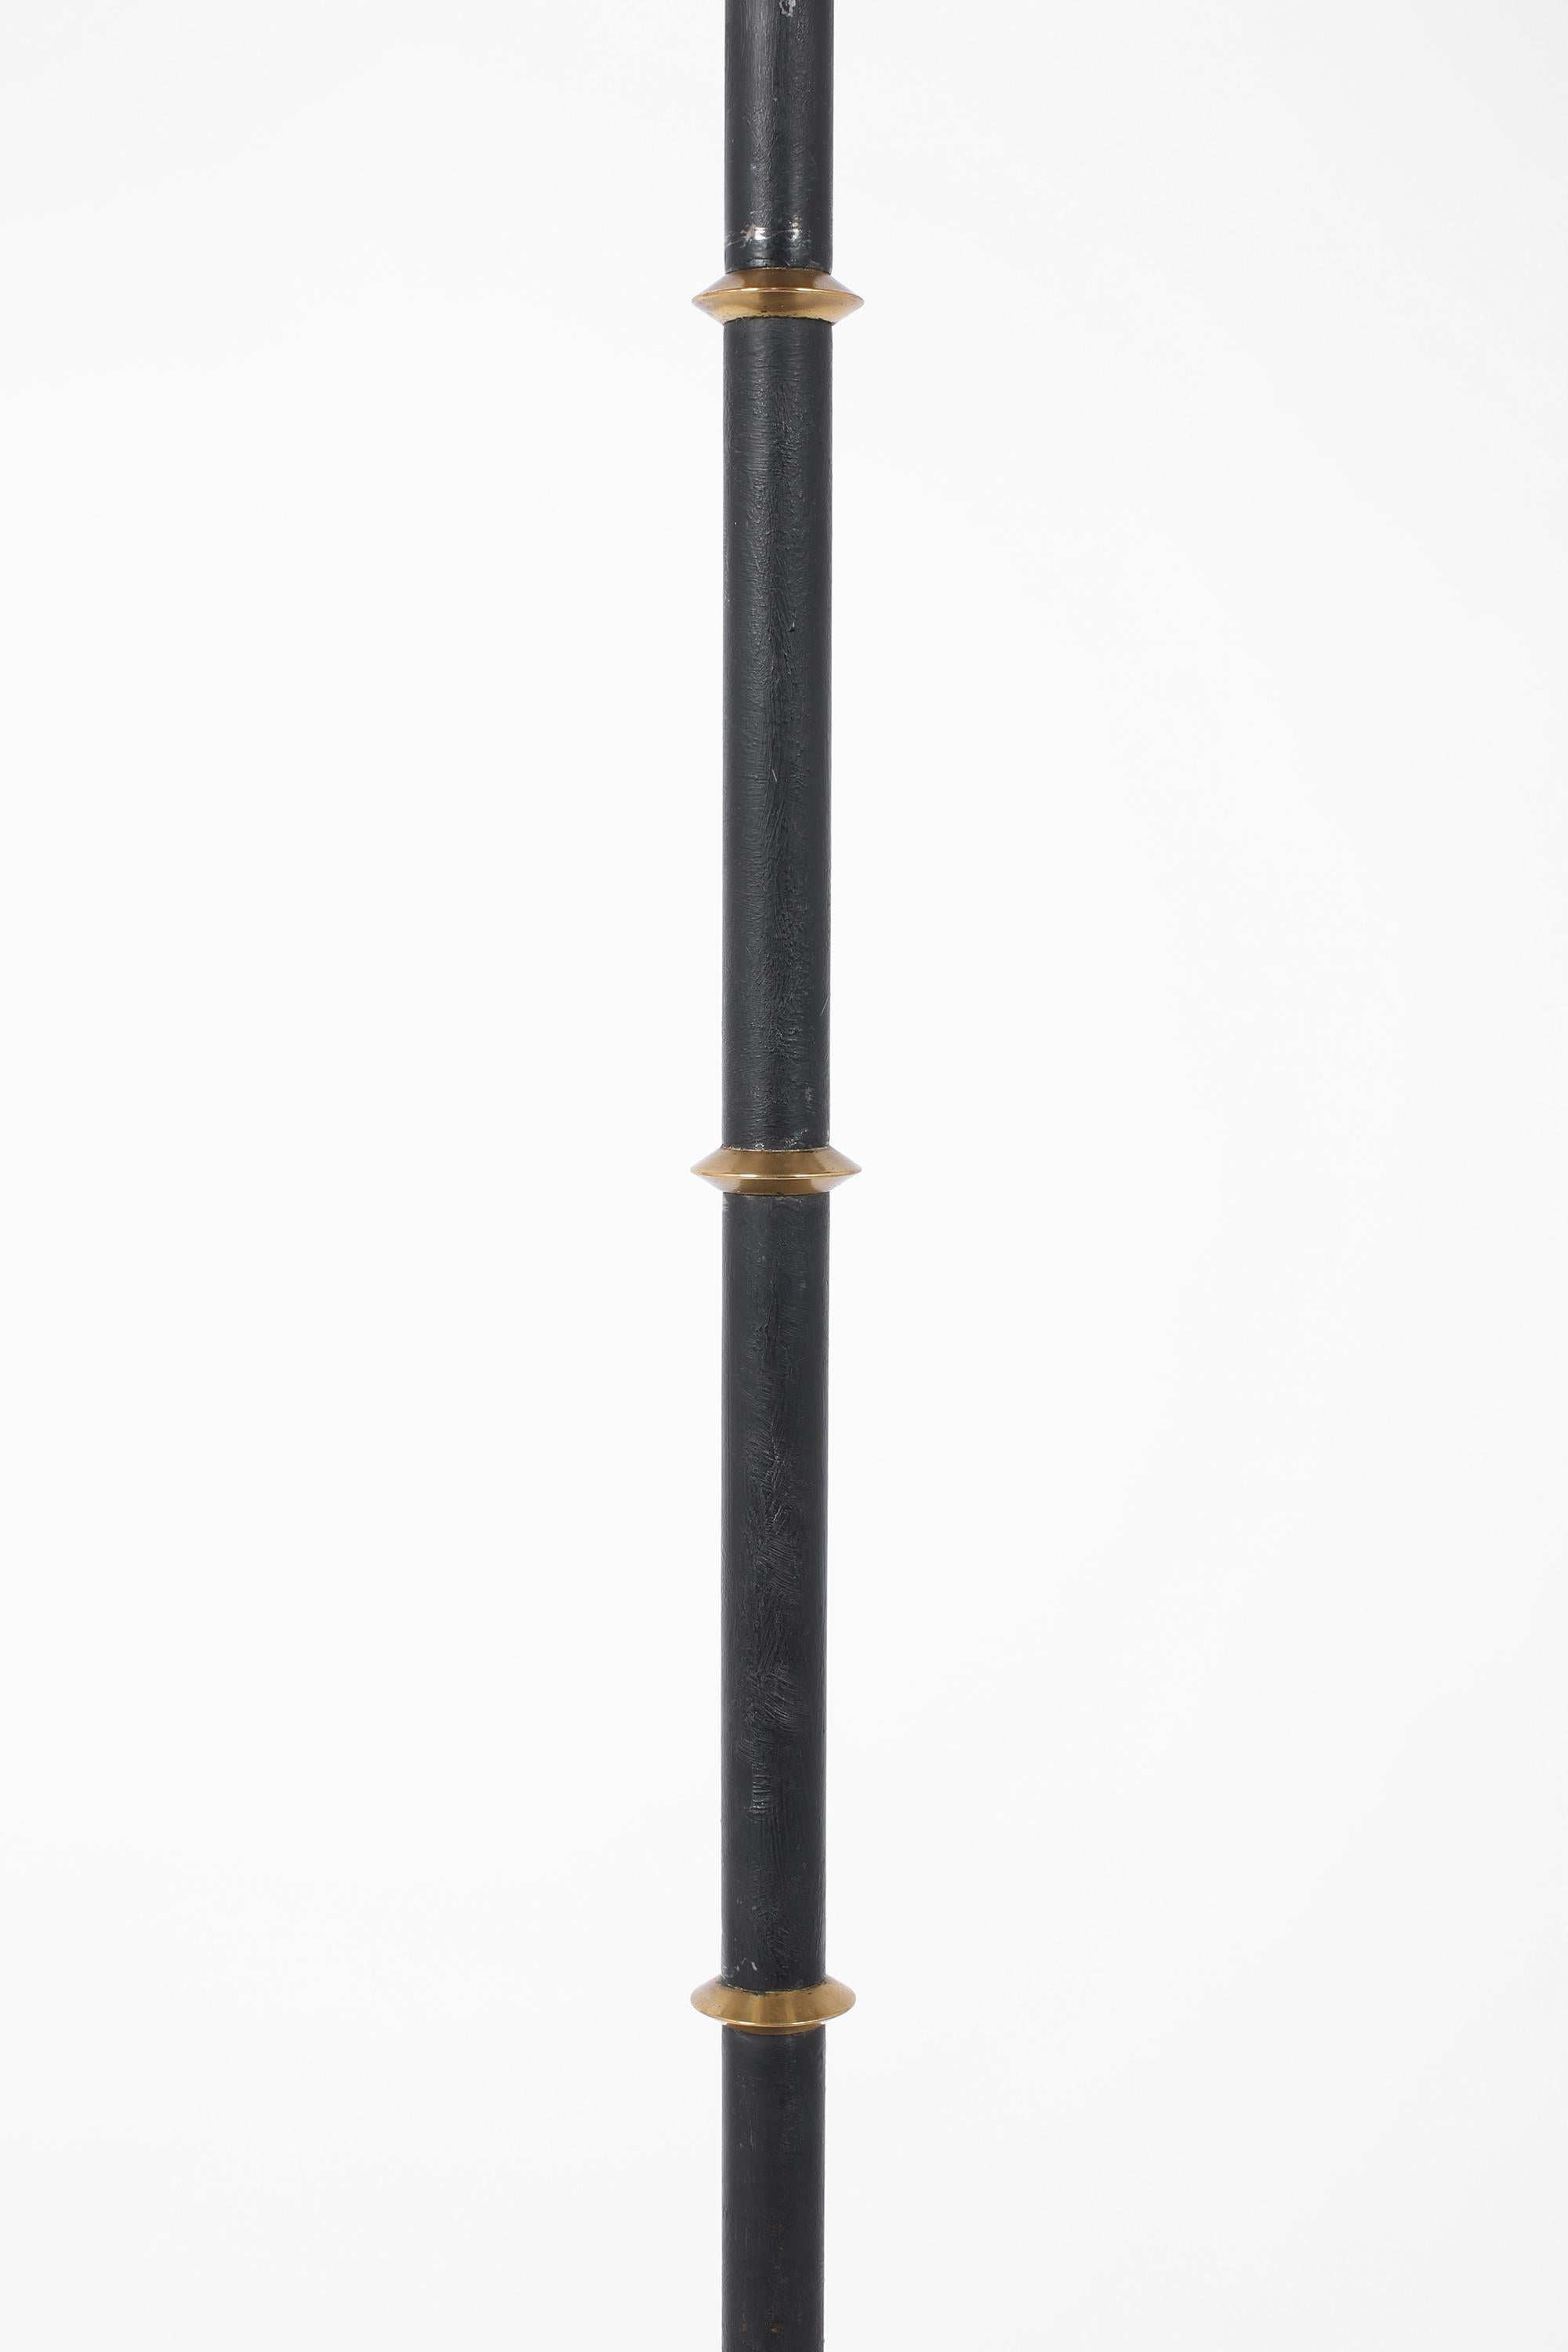 French Steel, Brass and Cast Iron Floor Lamp by Gilles Sermadiras